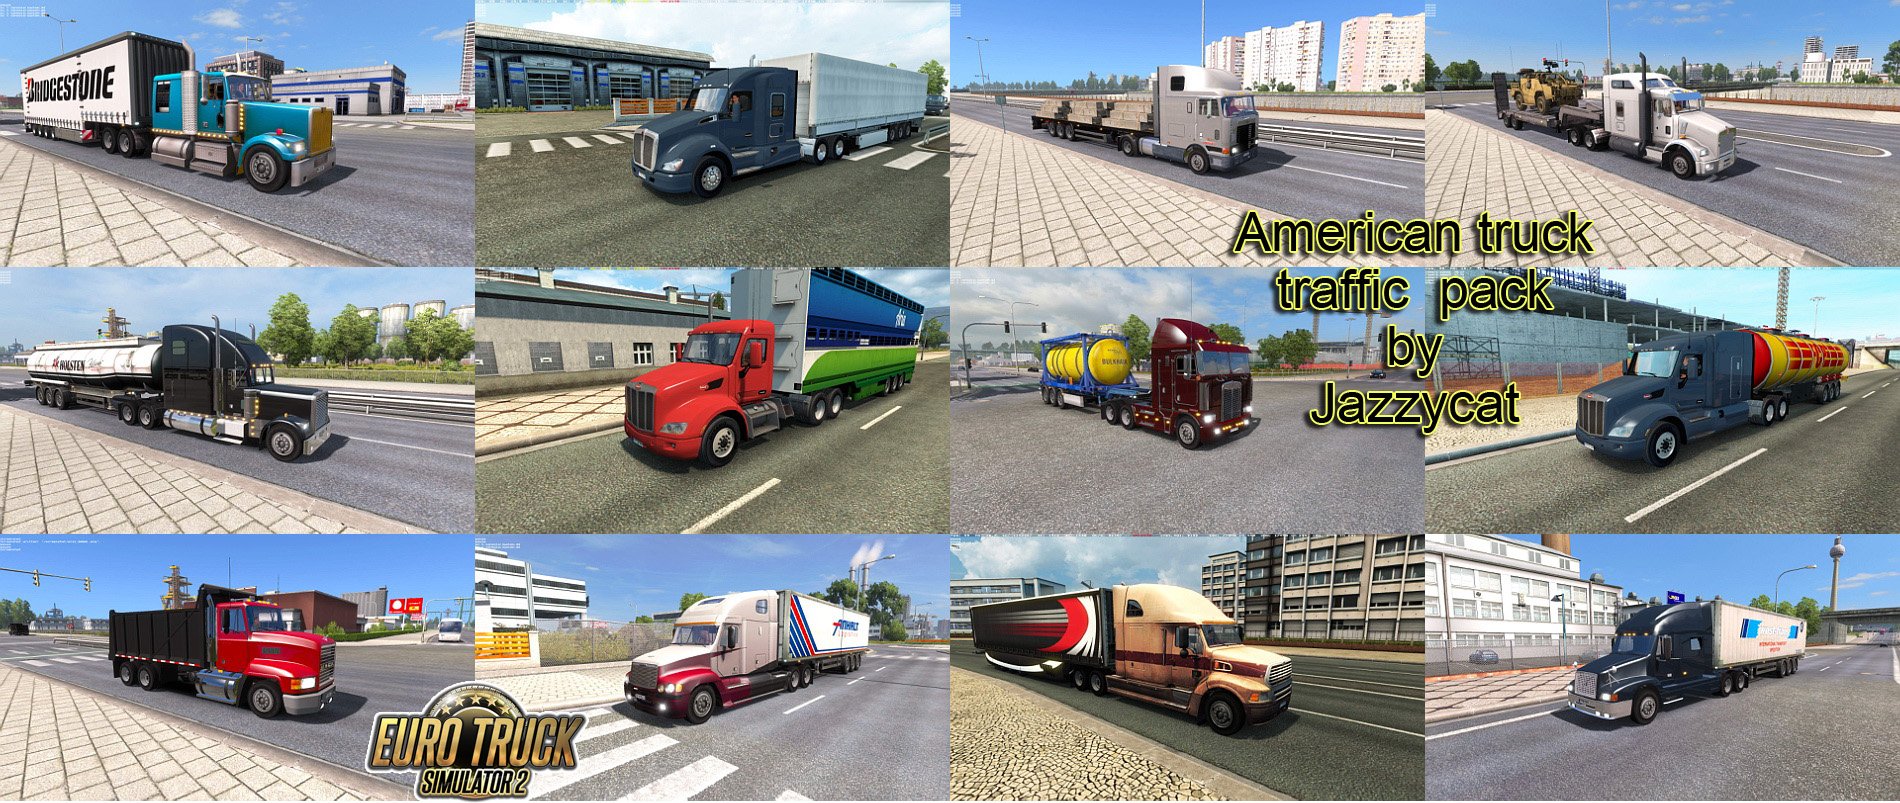 American Truck Traffic Pack v1.3.1 by Jazzycat